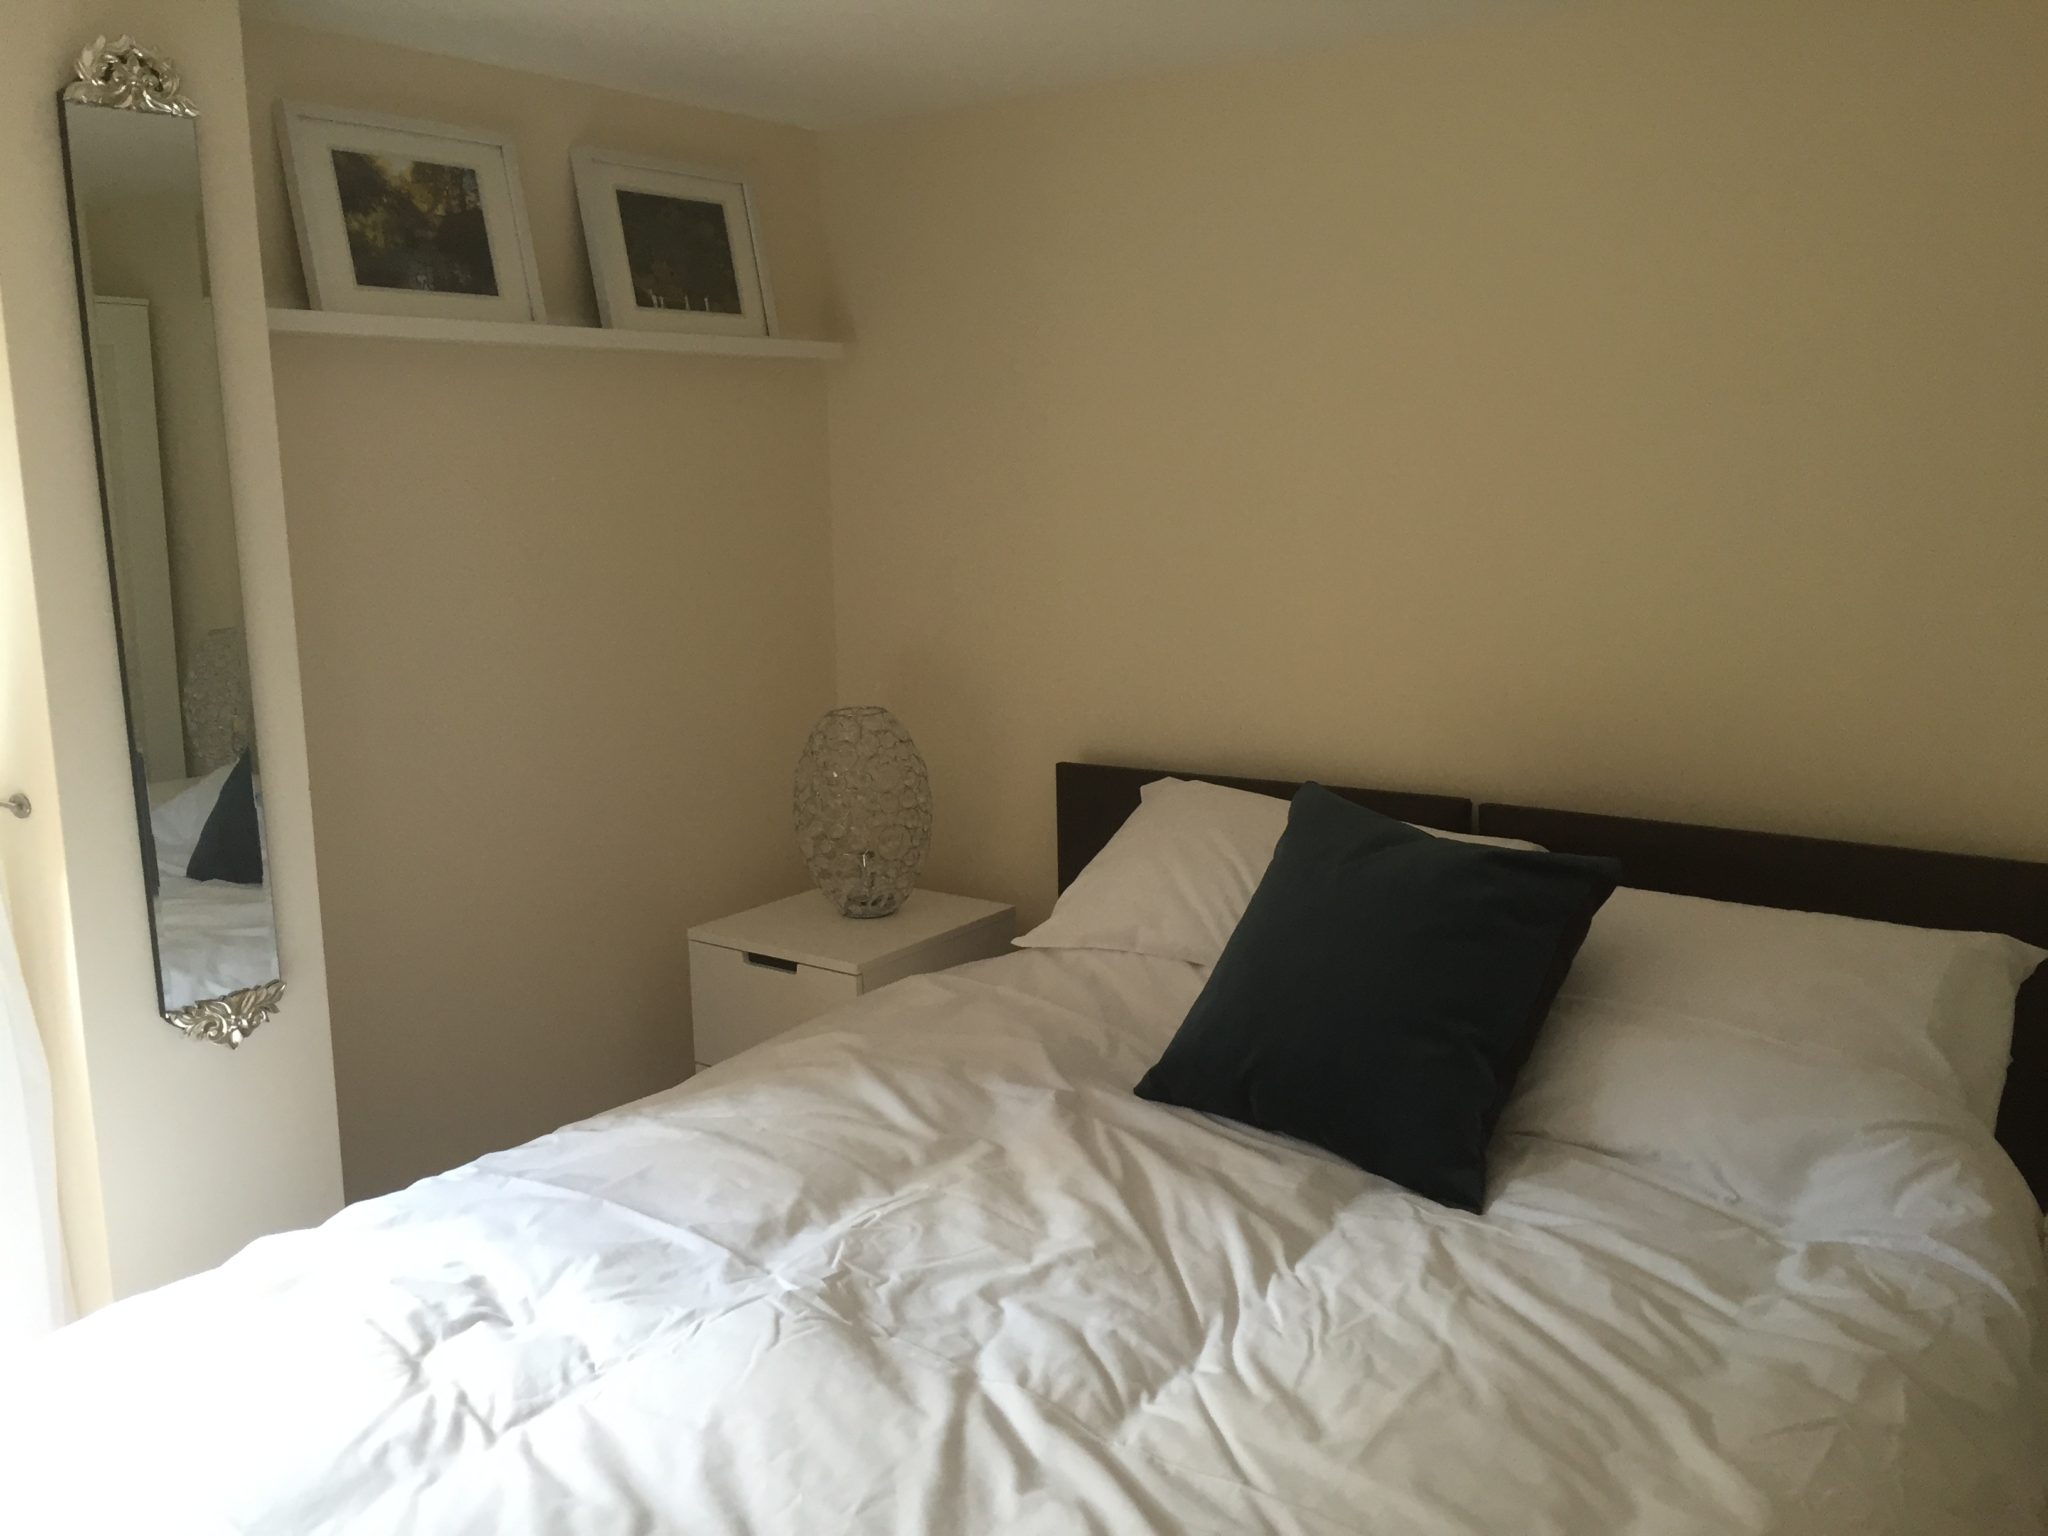 Serviced-Accommodation-Hertfordshire-available-now!-Book-cheap-Short-Let-Apartments-in-the-heart-of-Harpenden-with-24/7-check-in,-Courtyard-Garden-&-Fully-equipped-Kitchen-now!